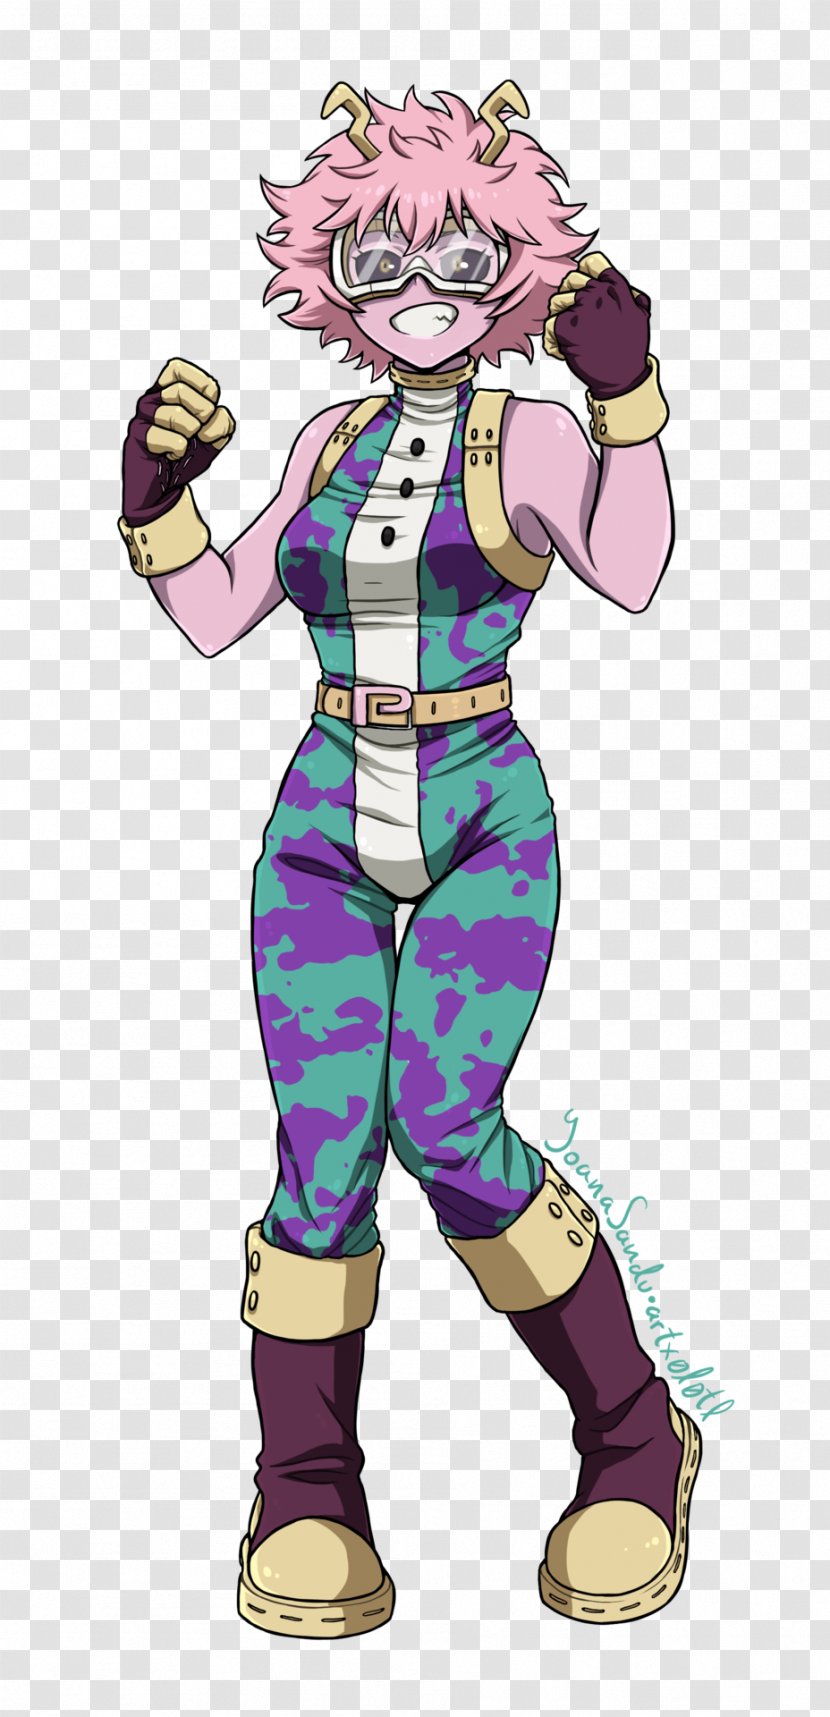 My Hero Academia Costume Design Momo Fiction - Mythical Creature - Fan Art Transparent PNG